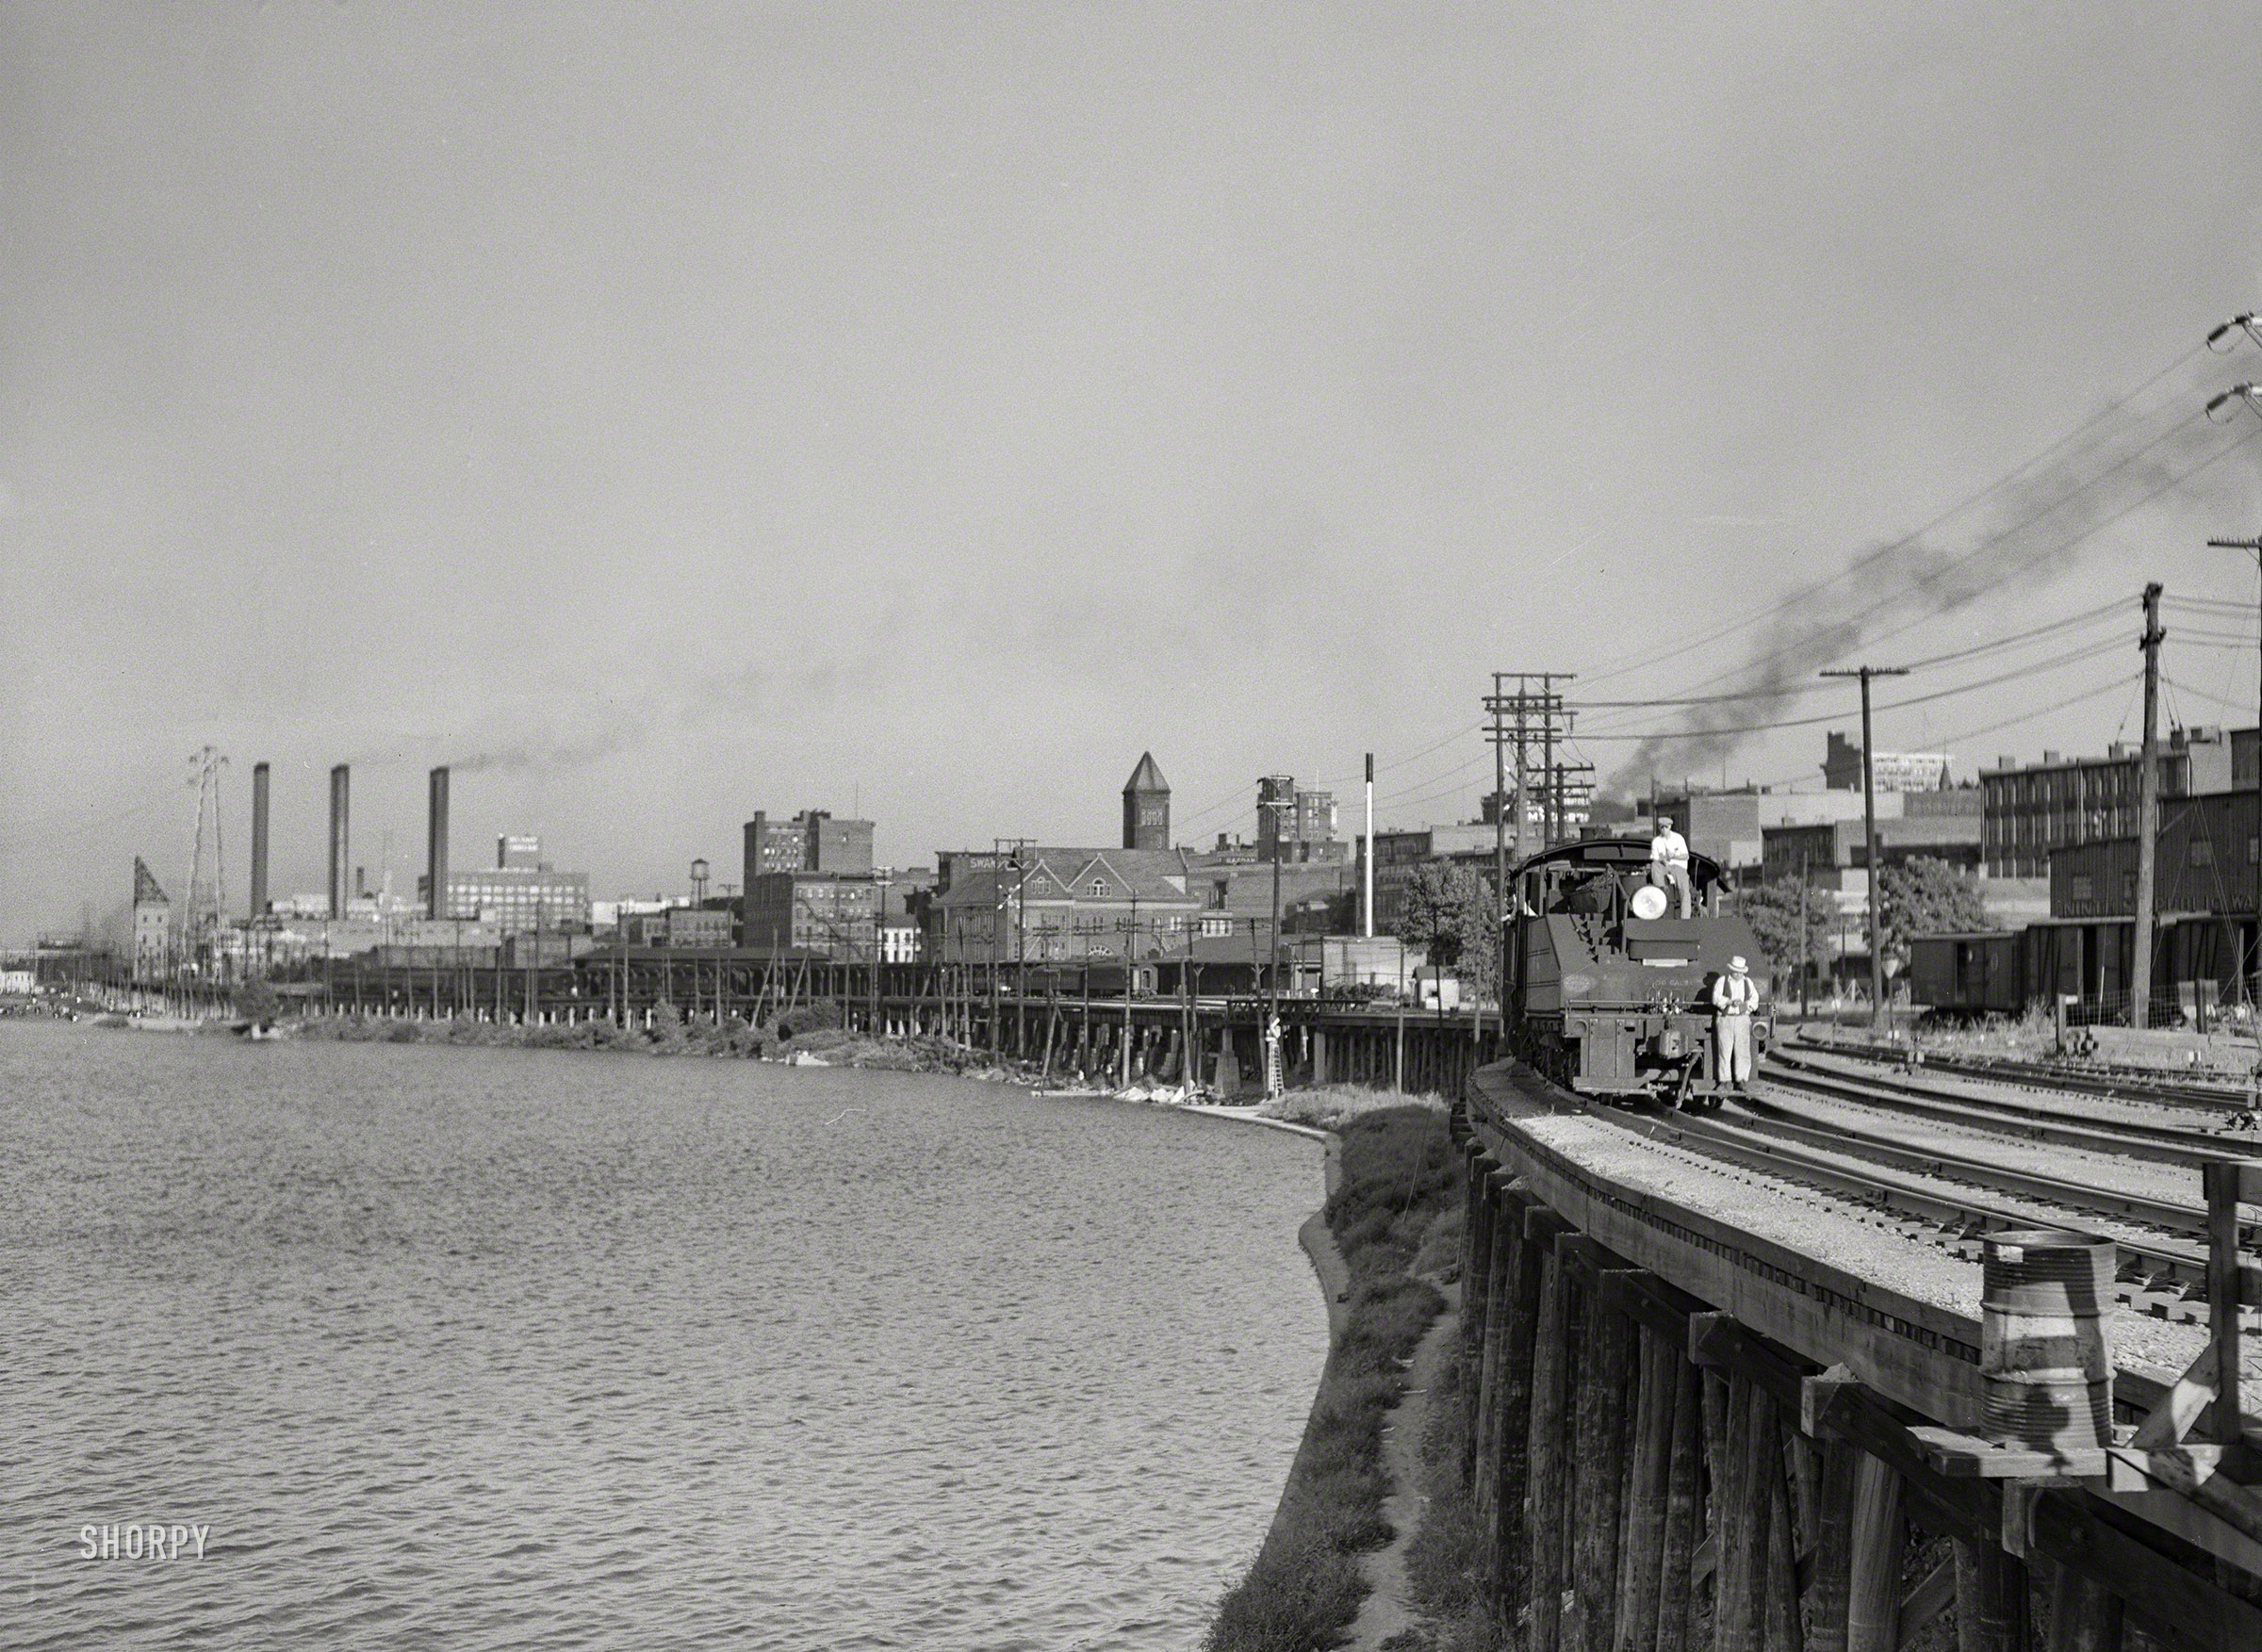 August 1940. "Kentucky. Louisville waterfront along the Ohio River." Medium format negative by Marion Post Wolcott for the Farm Security Administration. View full size.